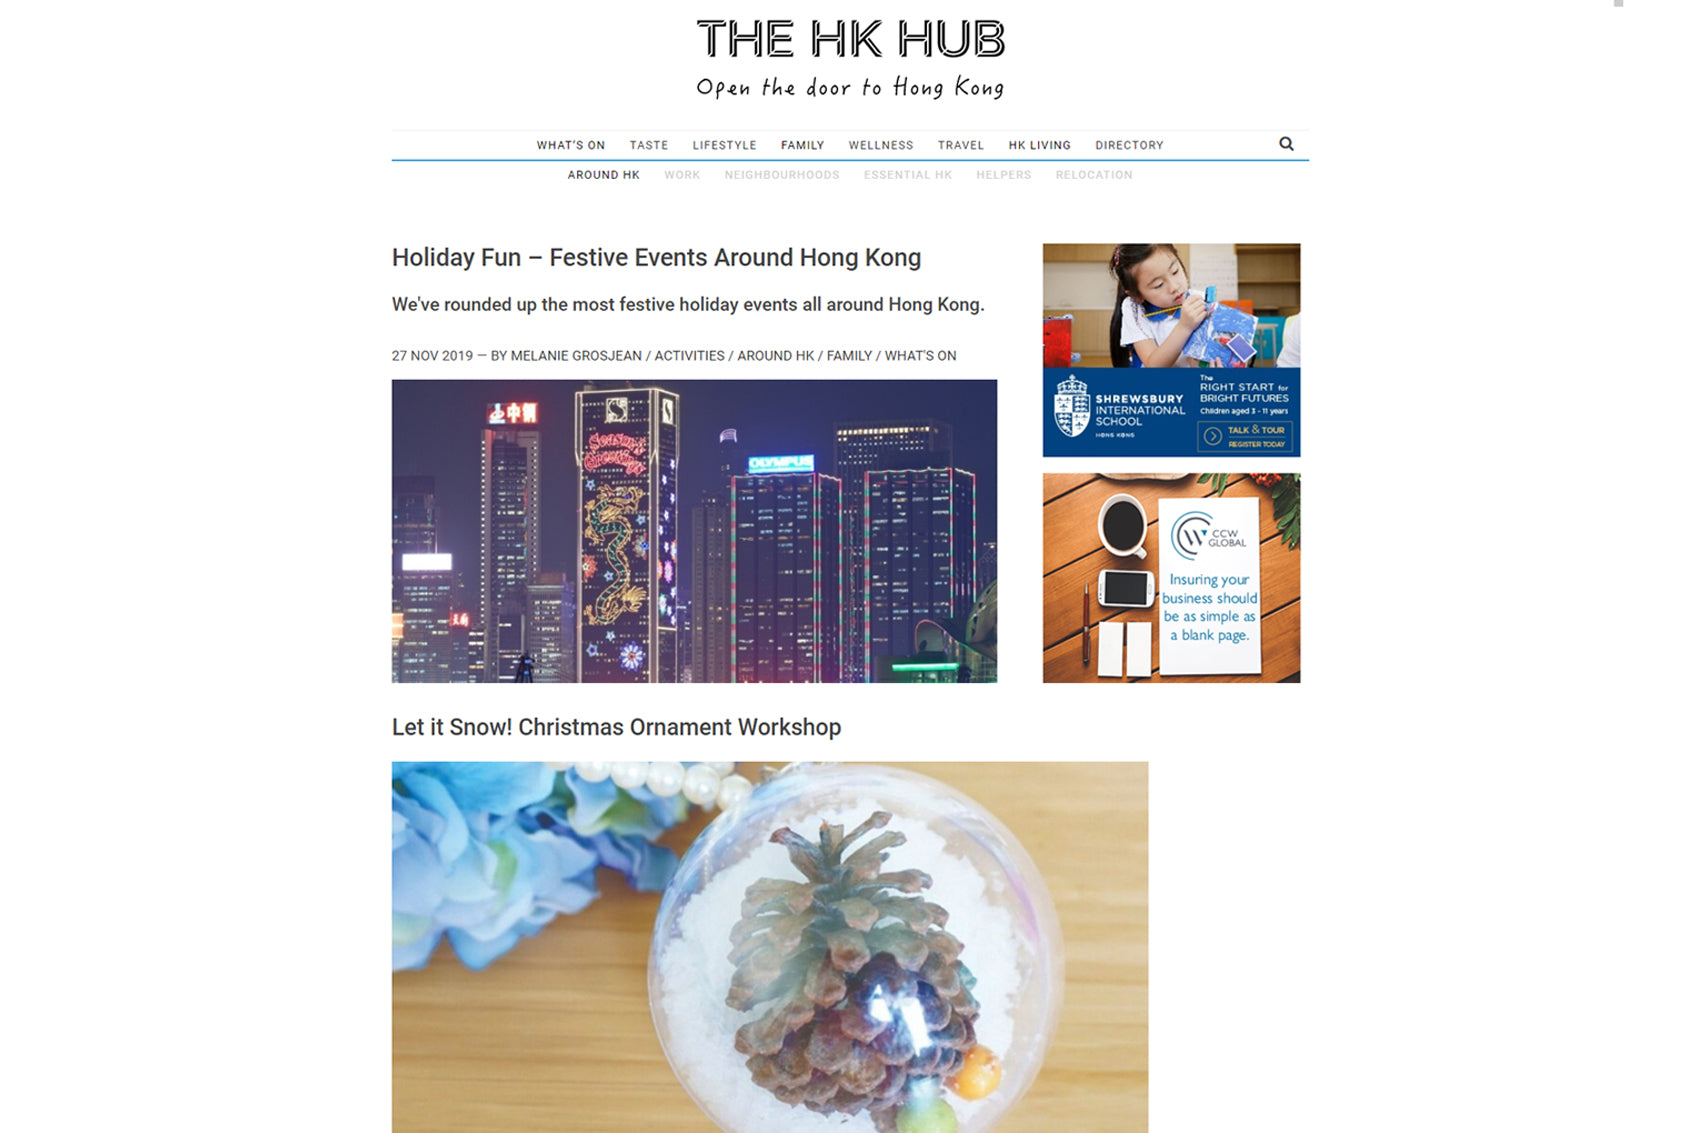 Featured in The HK Hub: Holiday Fun Festival Events Around HK